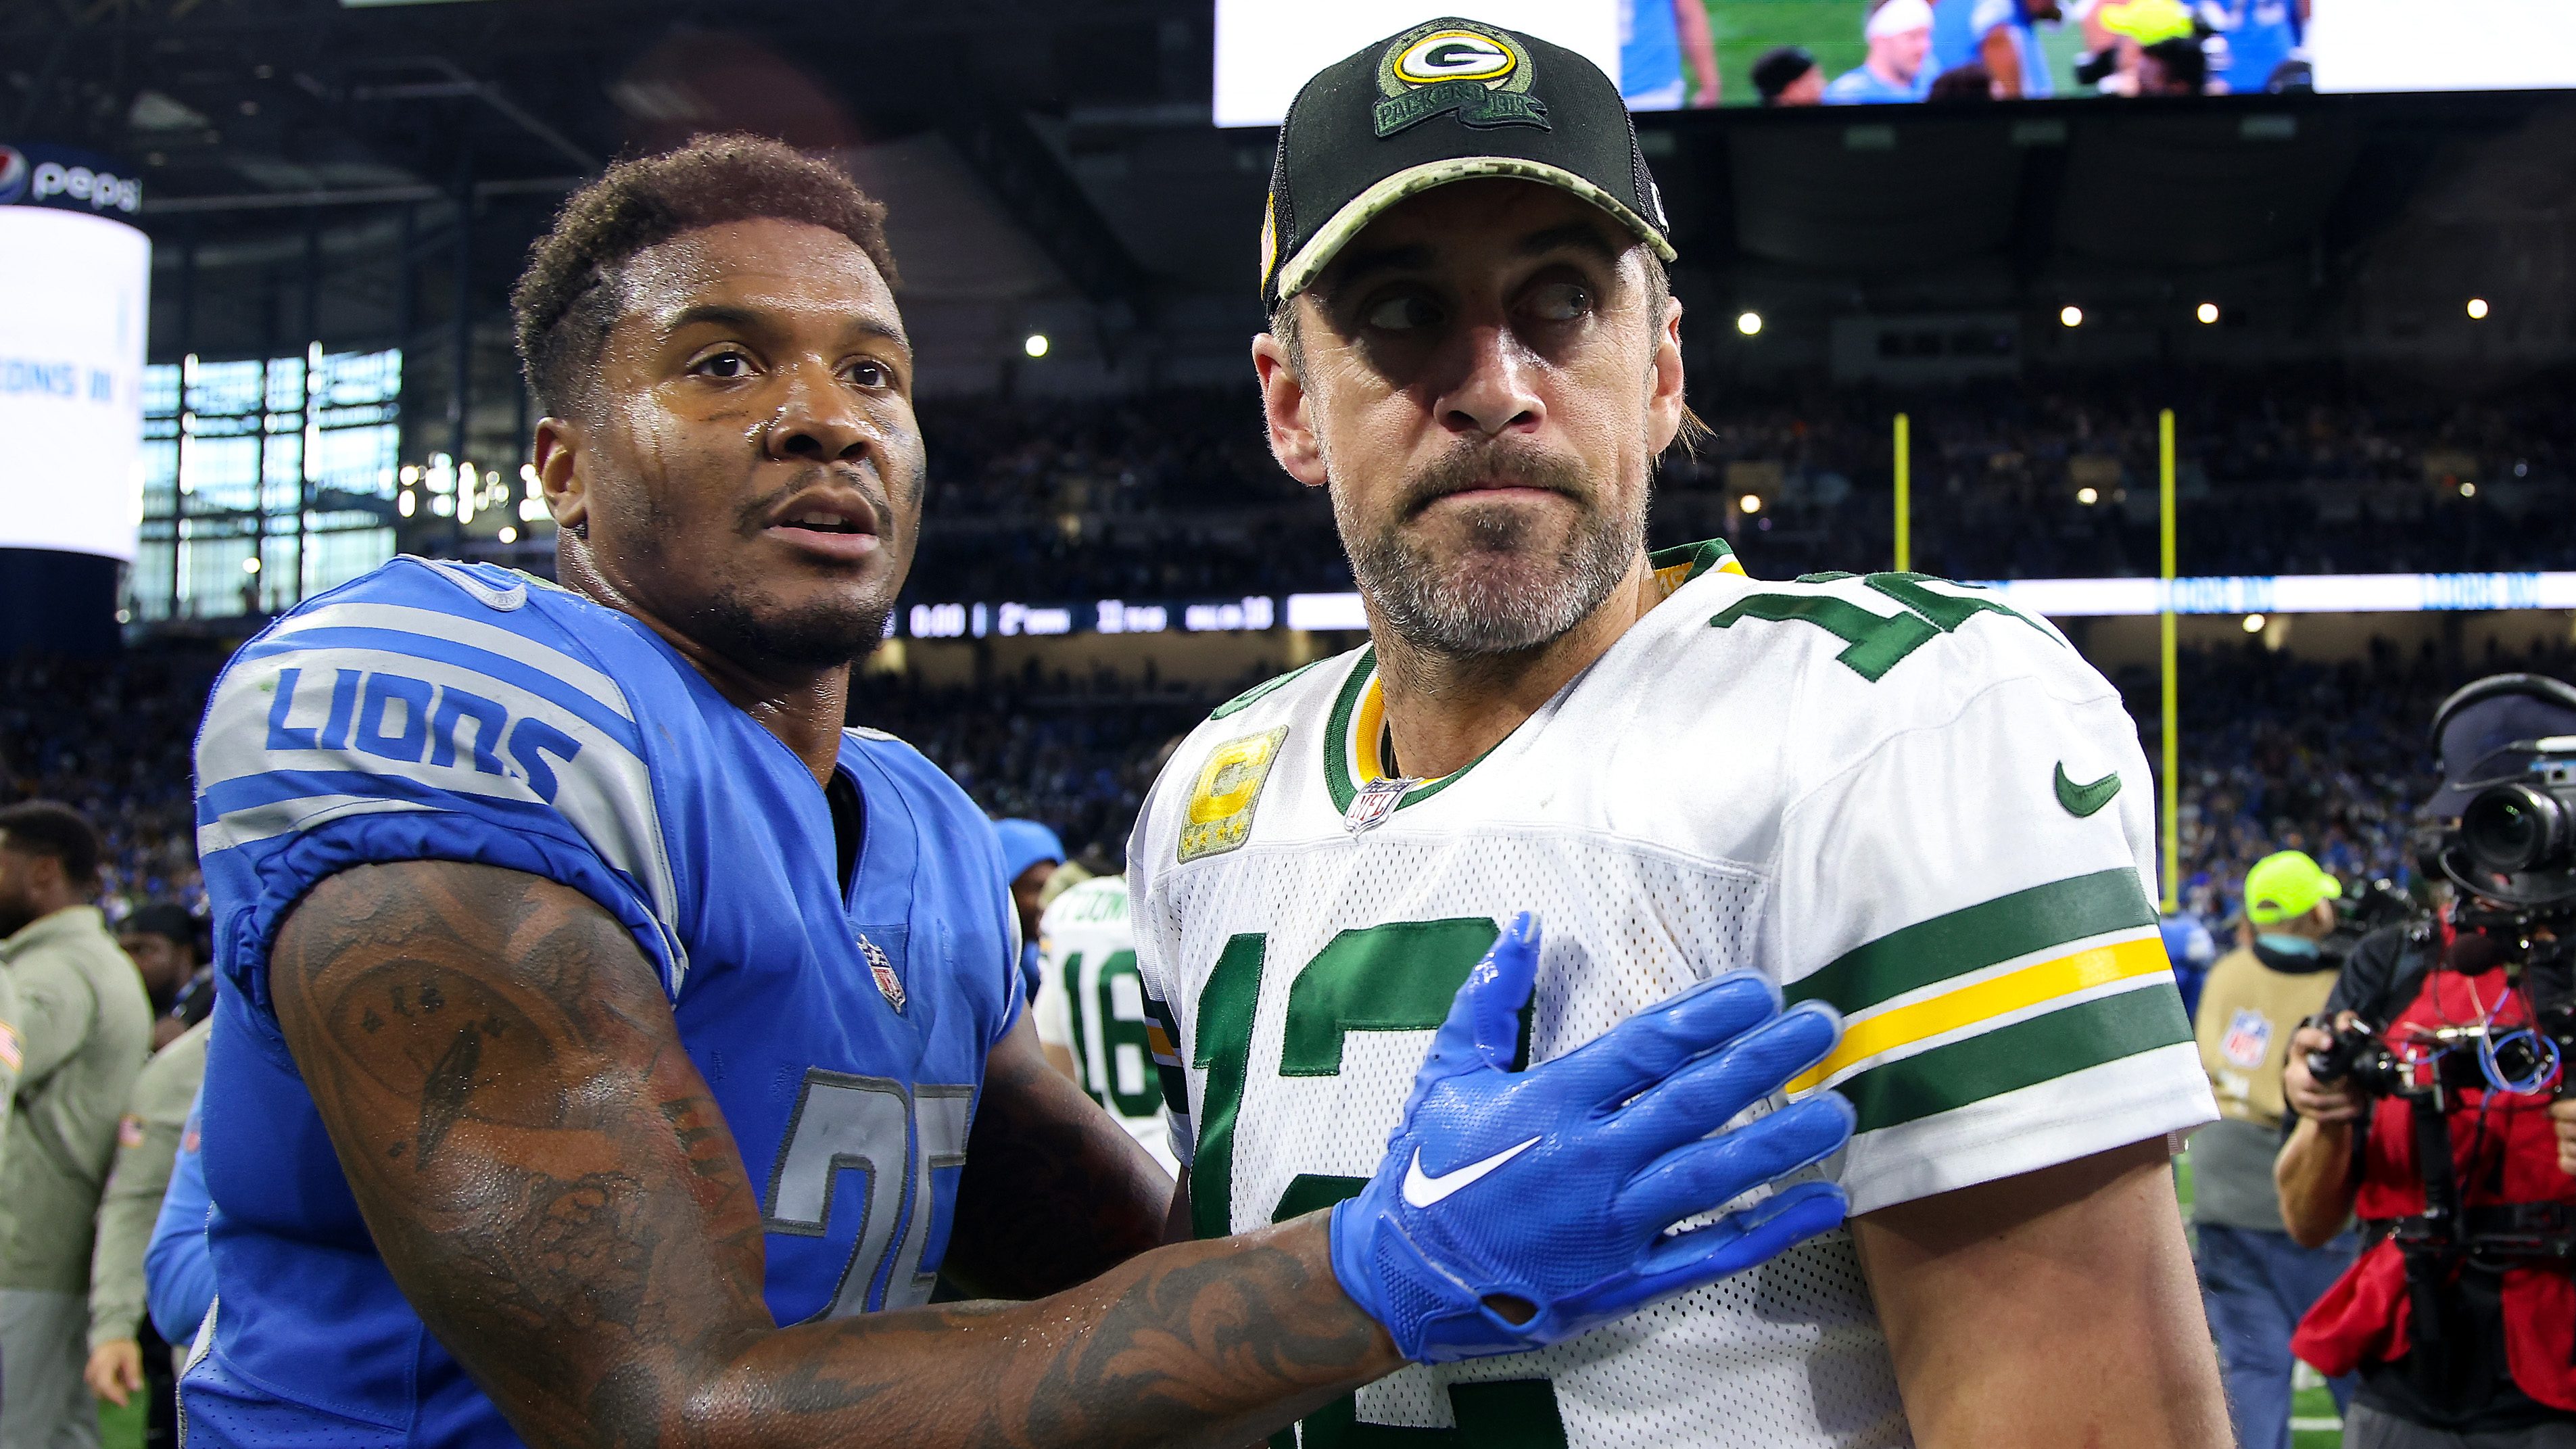 Lions-Packers Week 18 game moved to Sunday night prime time